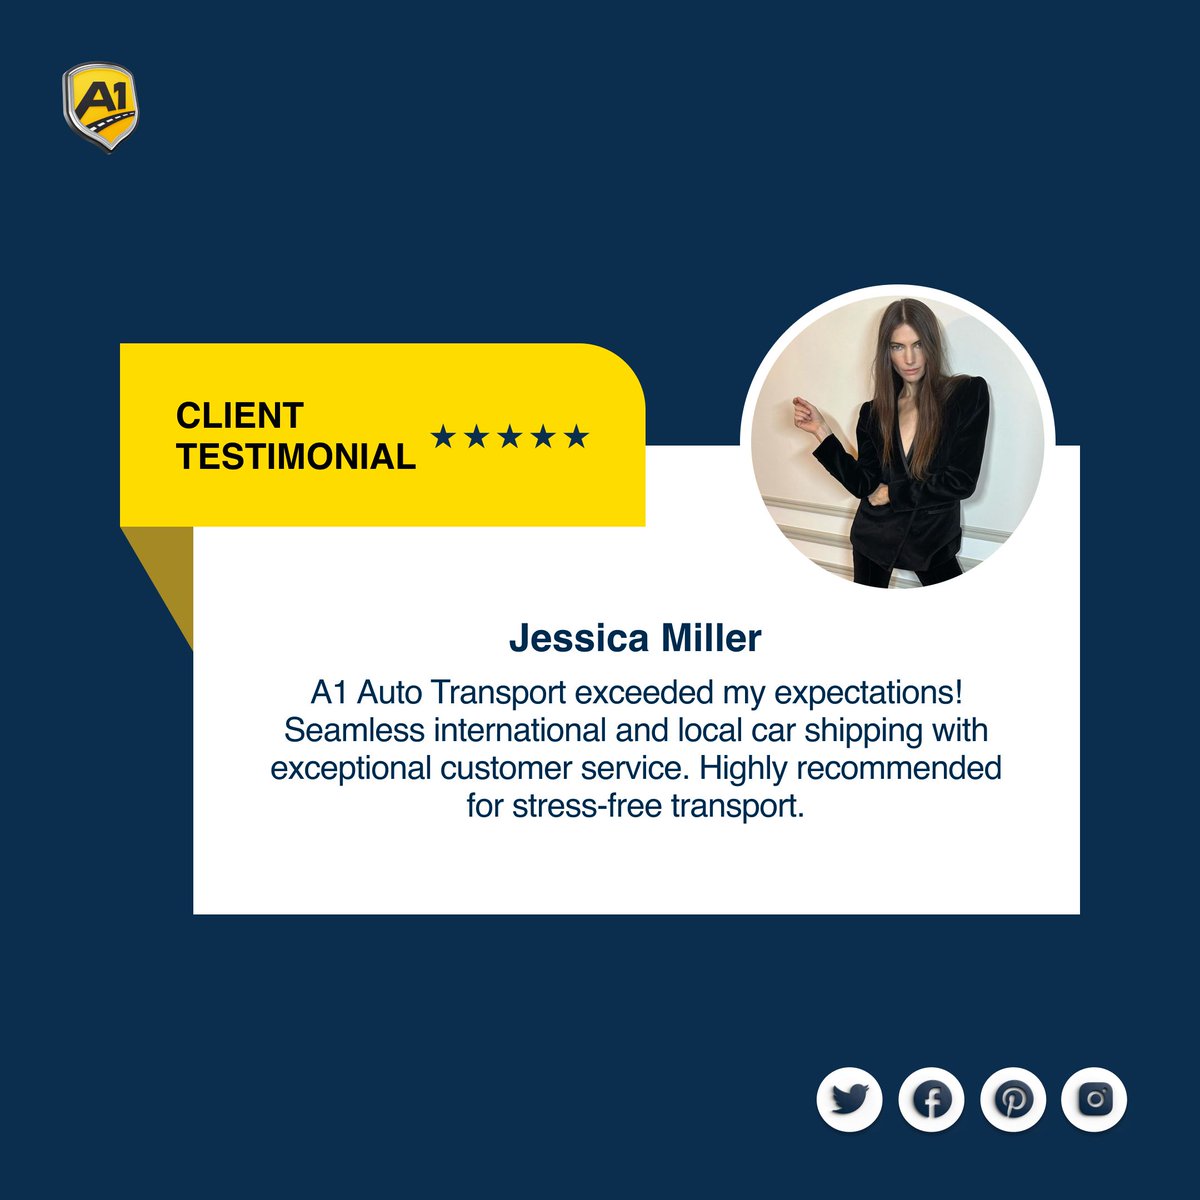 Seamless and professional - that’s how Jessica Miller describes her A1 Auto Transport experience.😍

Be like Jessica and choose the best in the business for your auto transport needs 🤝 

➡️ Read more from our happy customers: a1autotransport.com